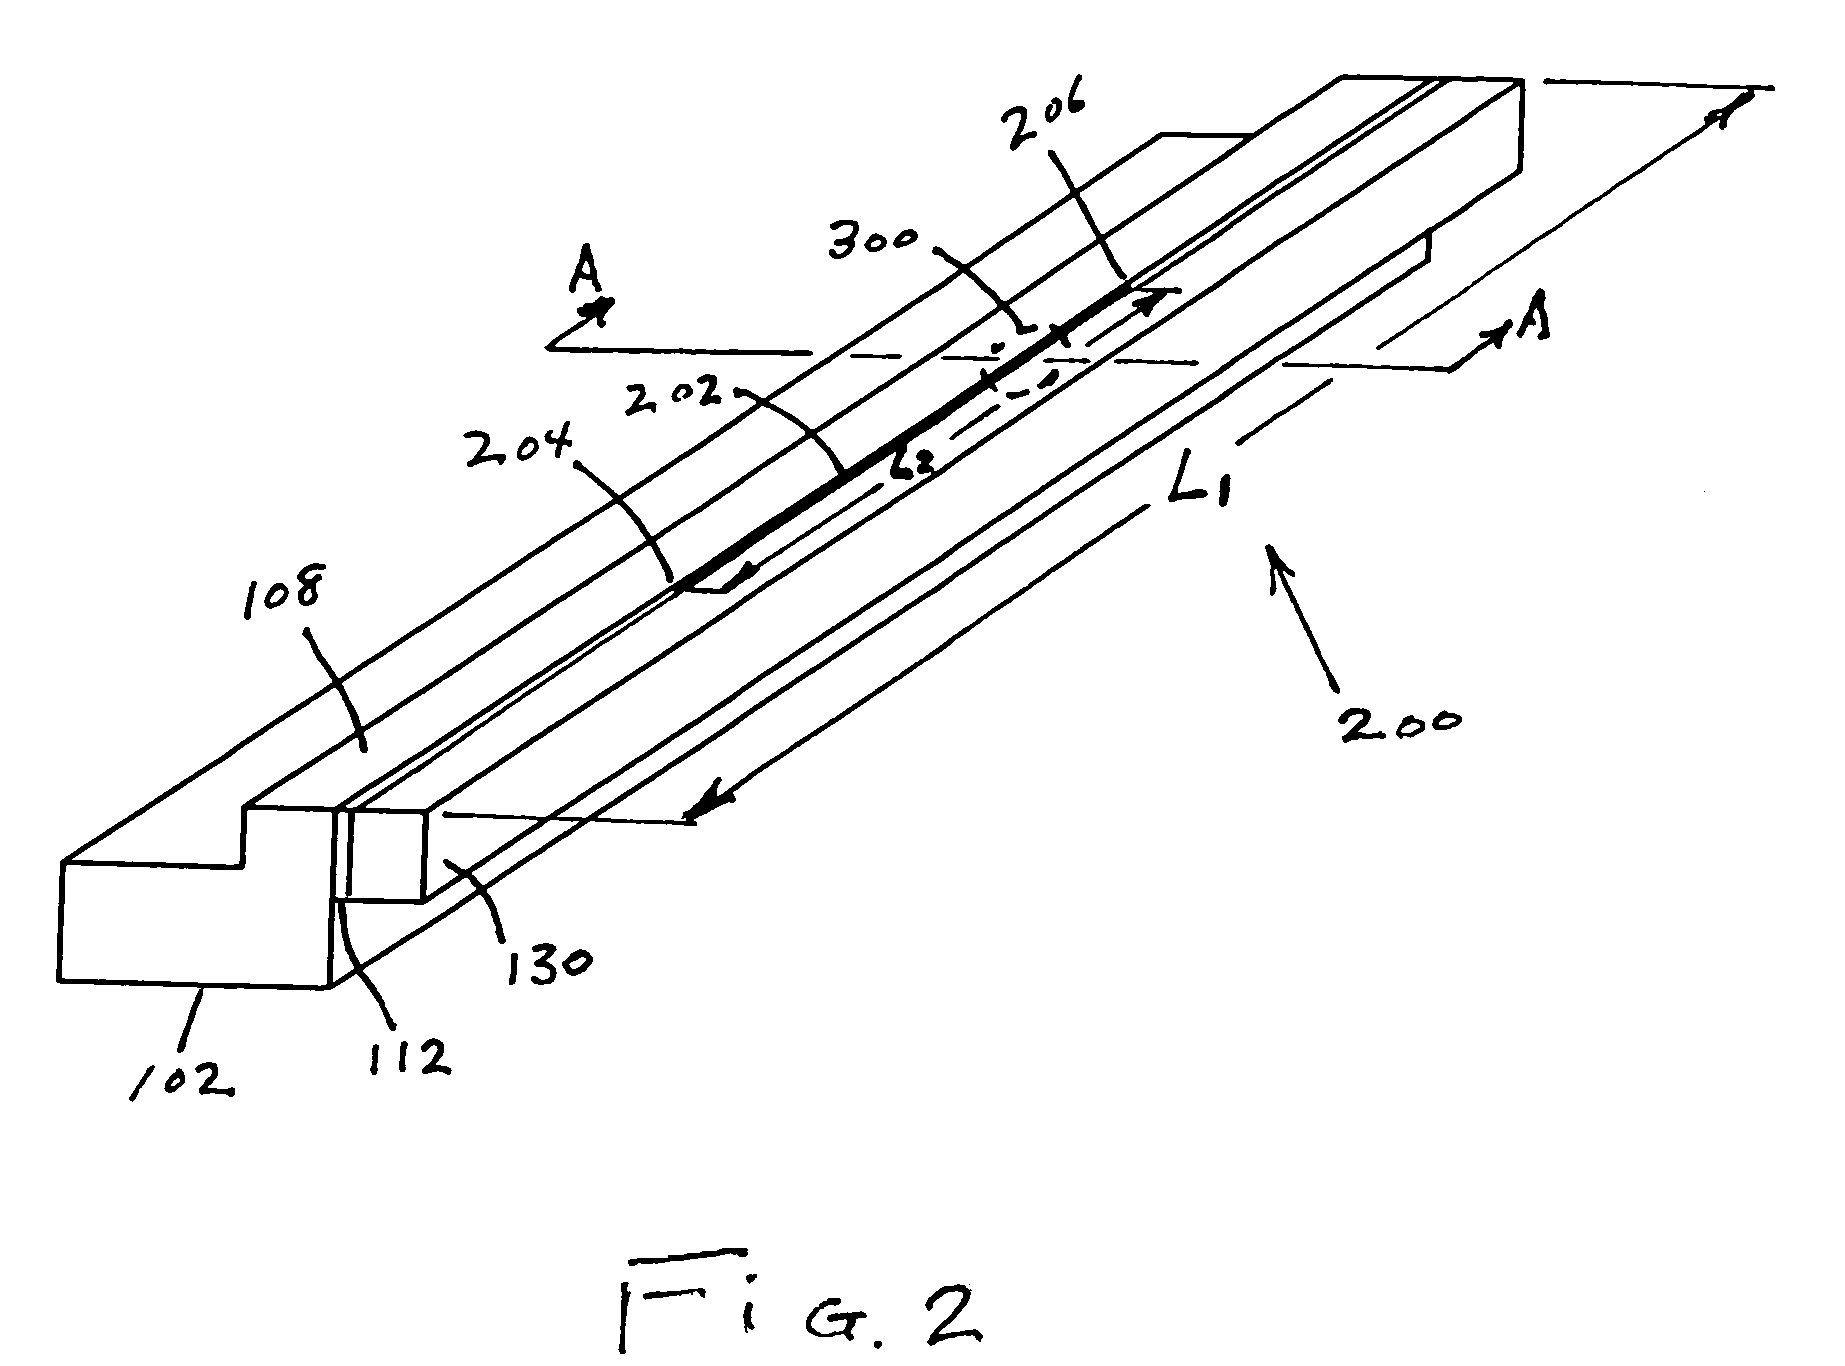 Filled-gap magnetic recording head and method of making